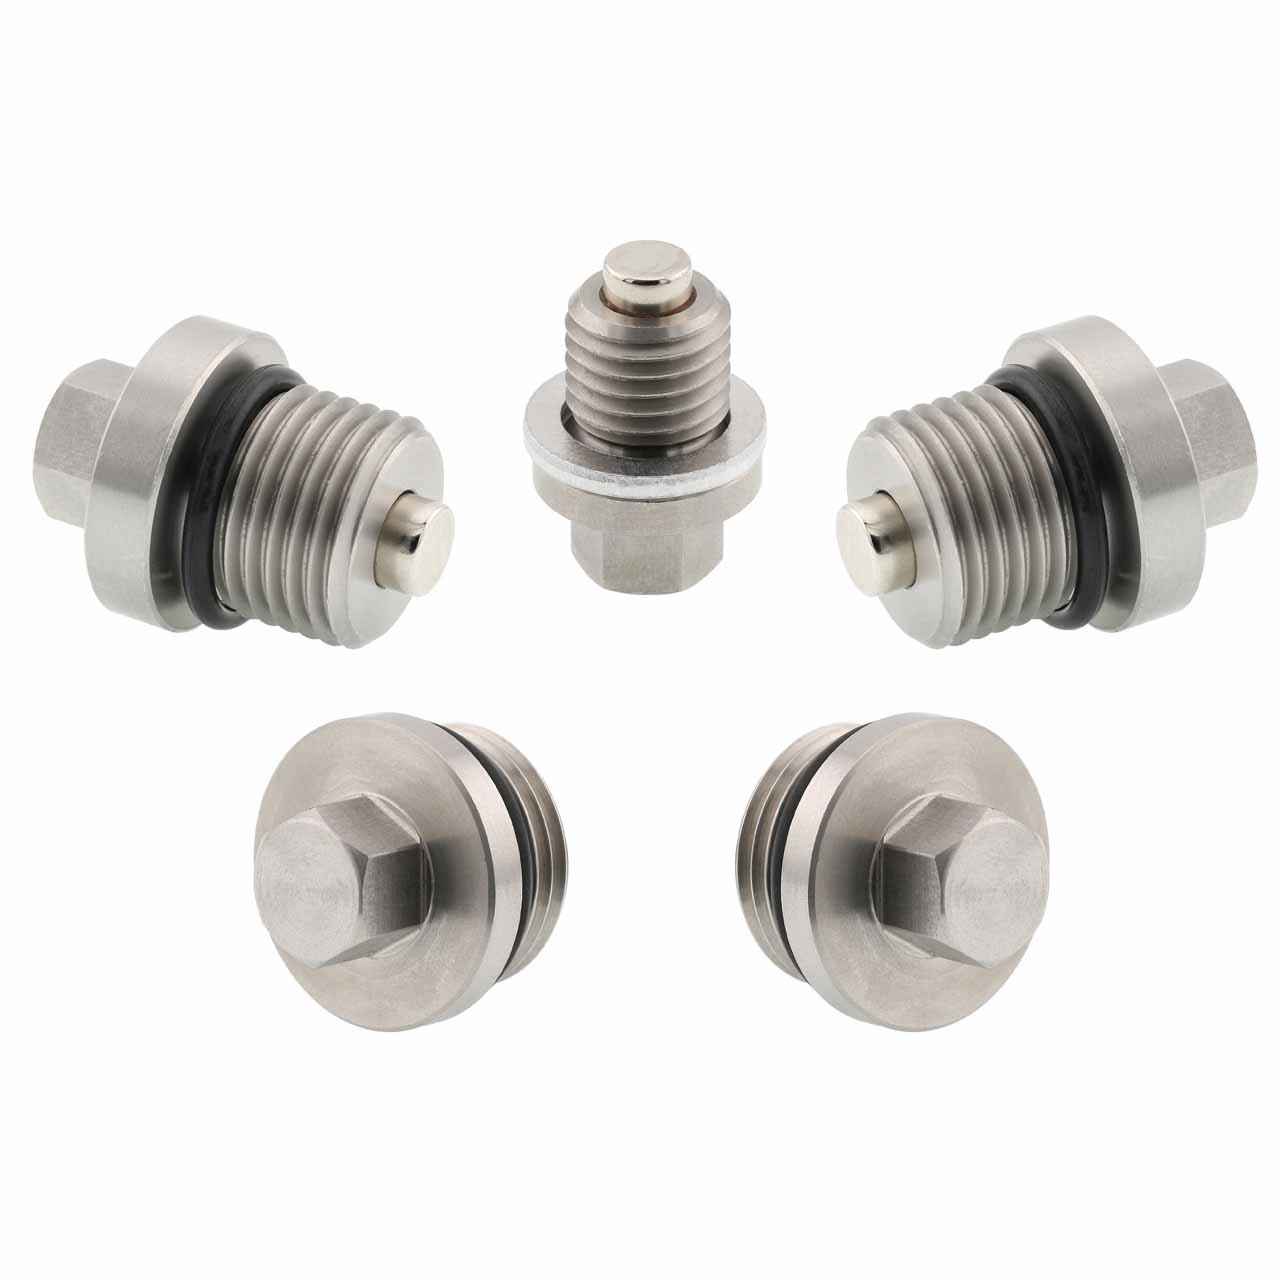 Polaris RZR 900 Magnetic Oil Drain Plug Kit - 2014-2020 - Engine, Transmission, Differential - Made In USA